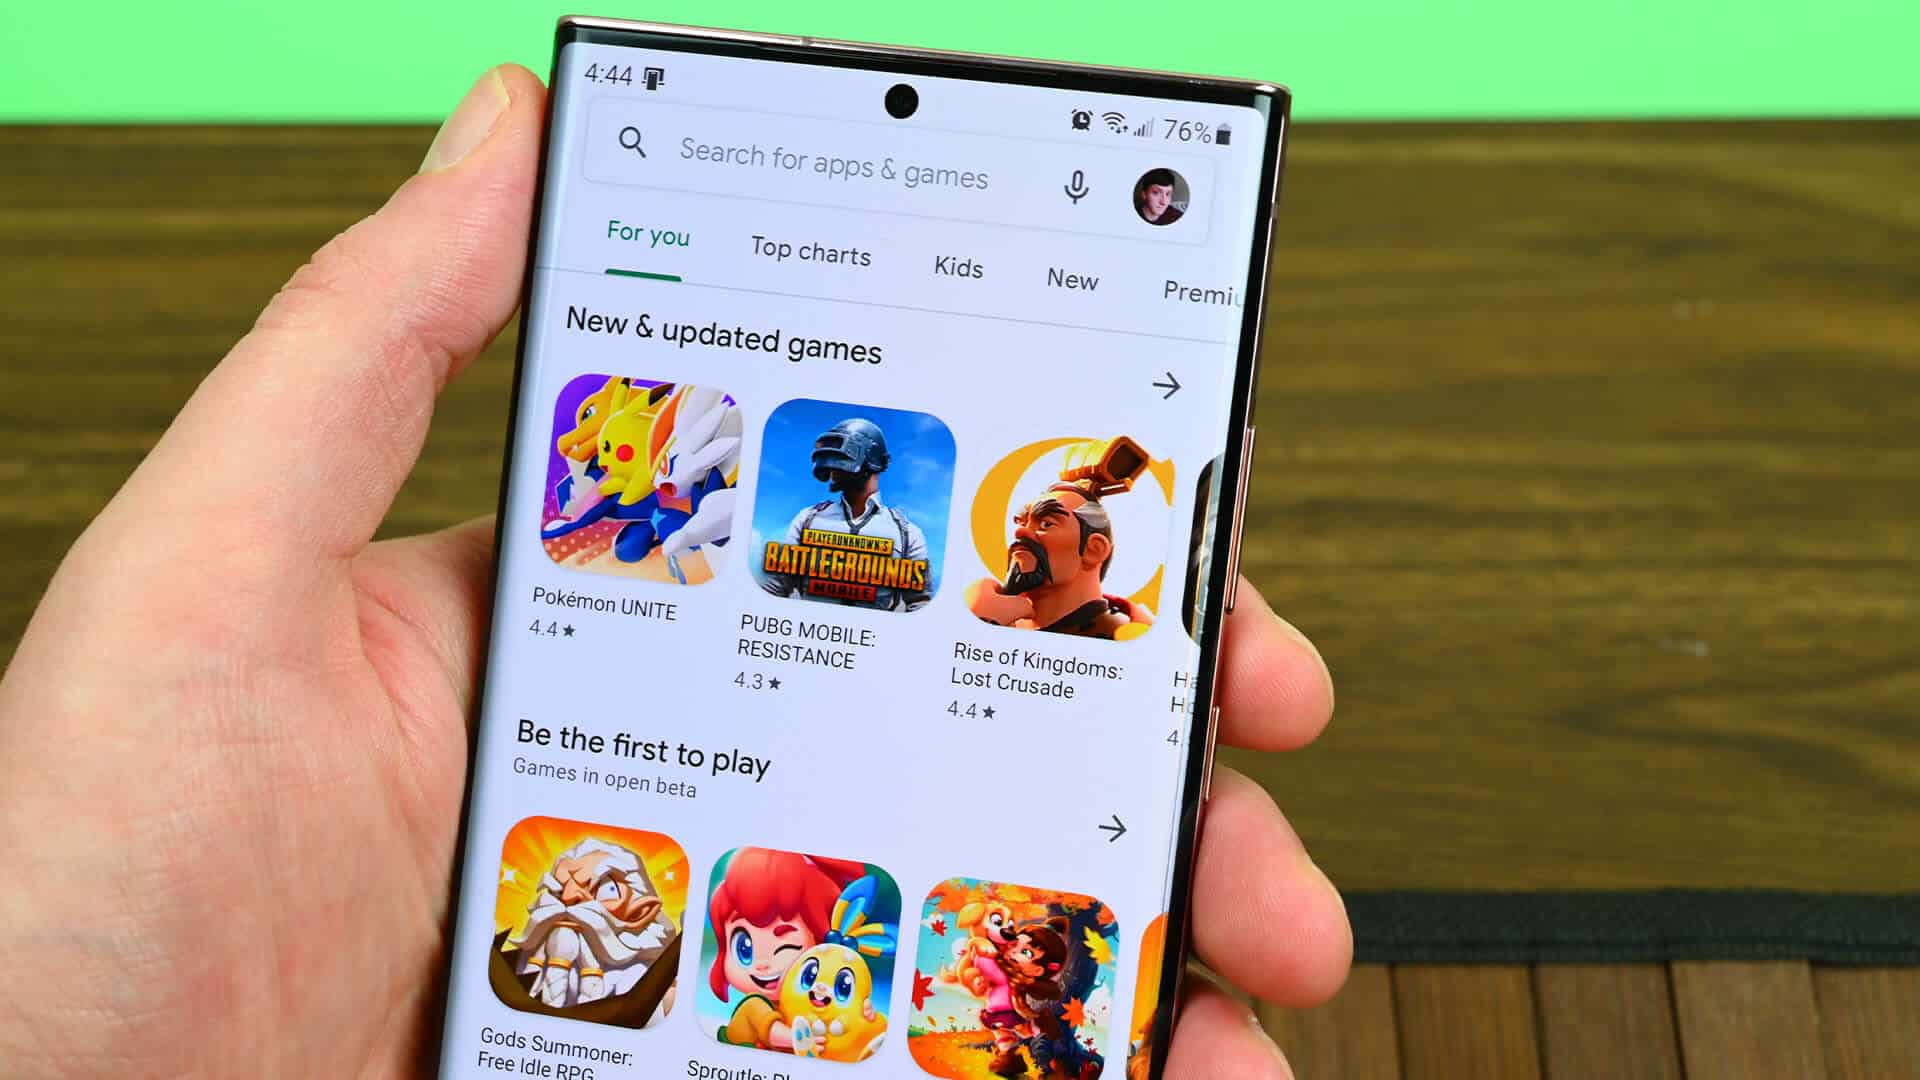 Download Apps Only From Google Play Store